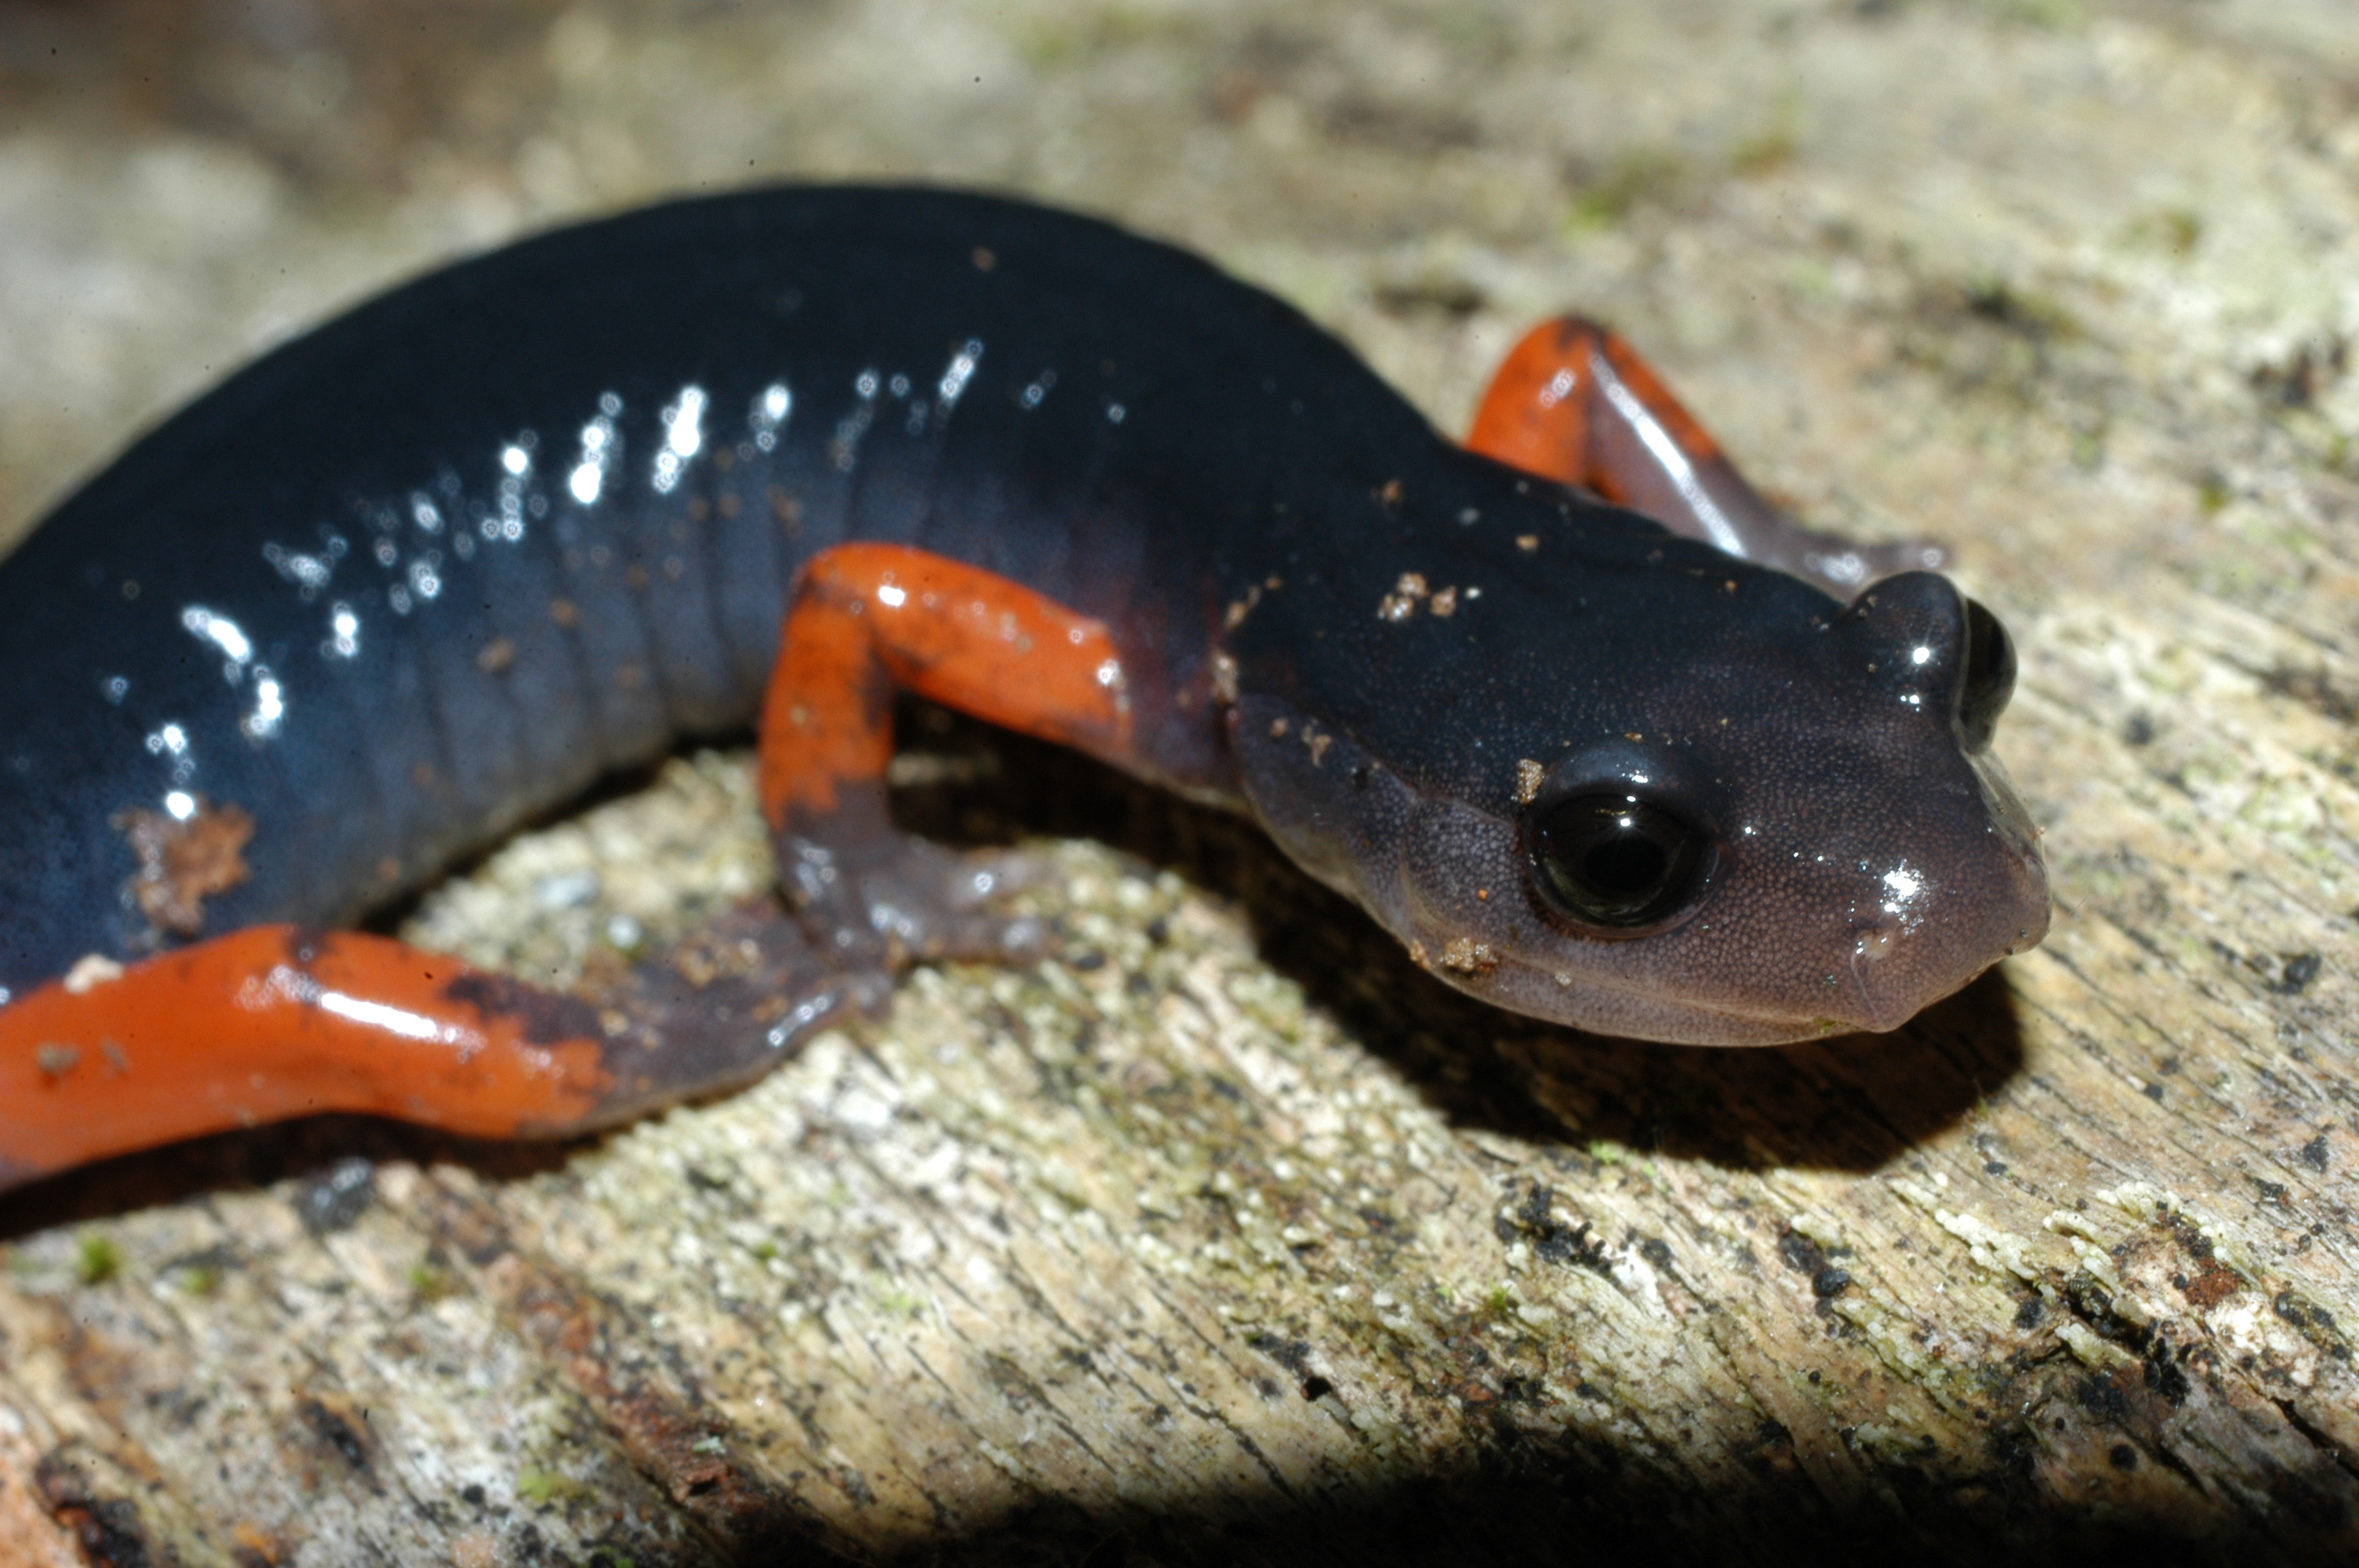 Salamanders are shrinking due to climate change, according 